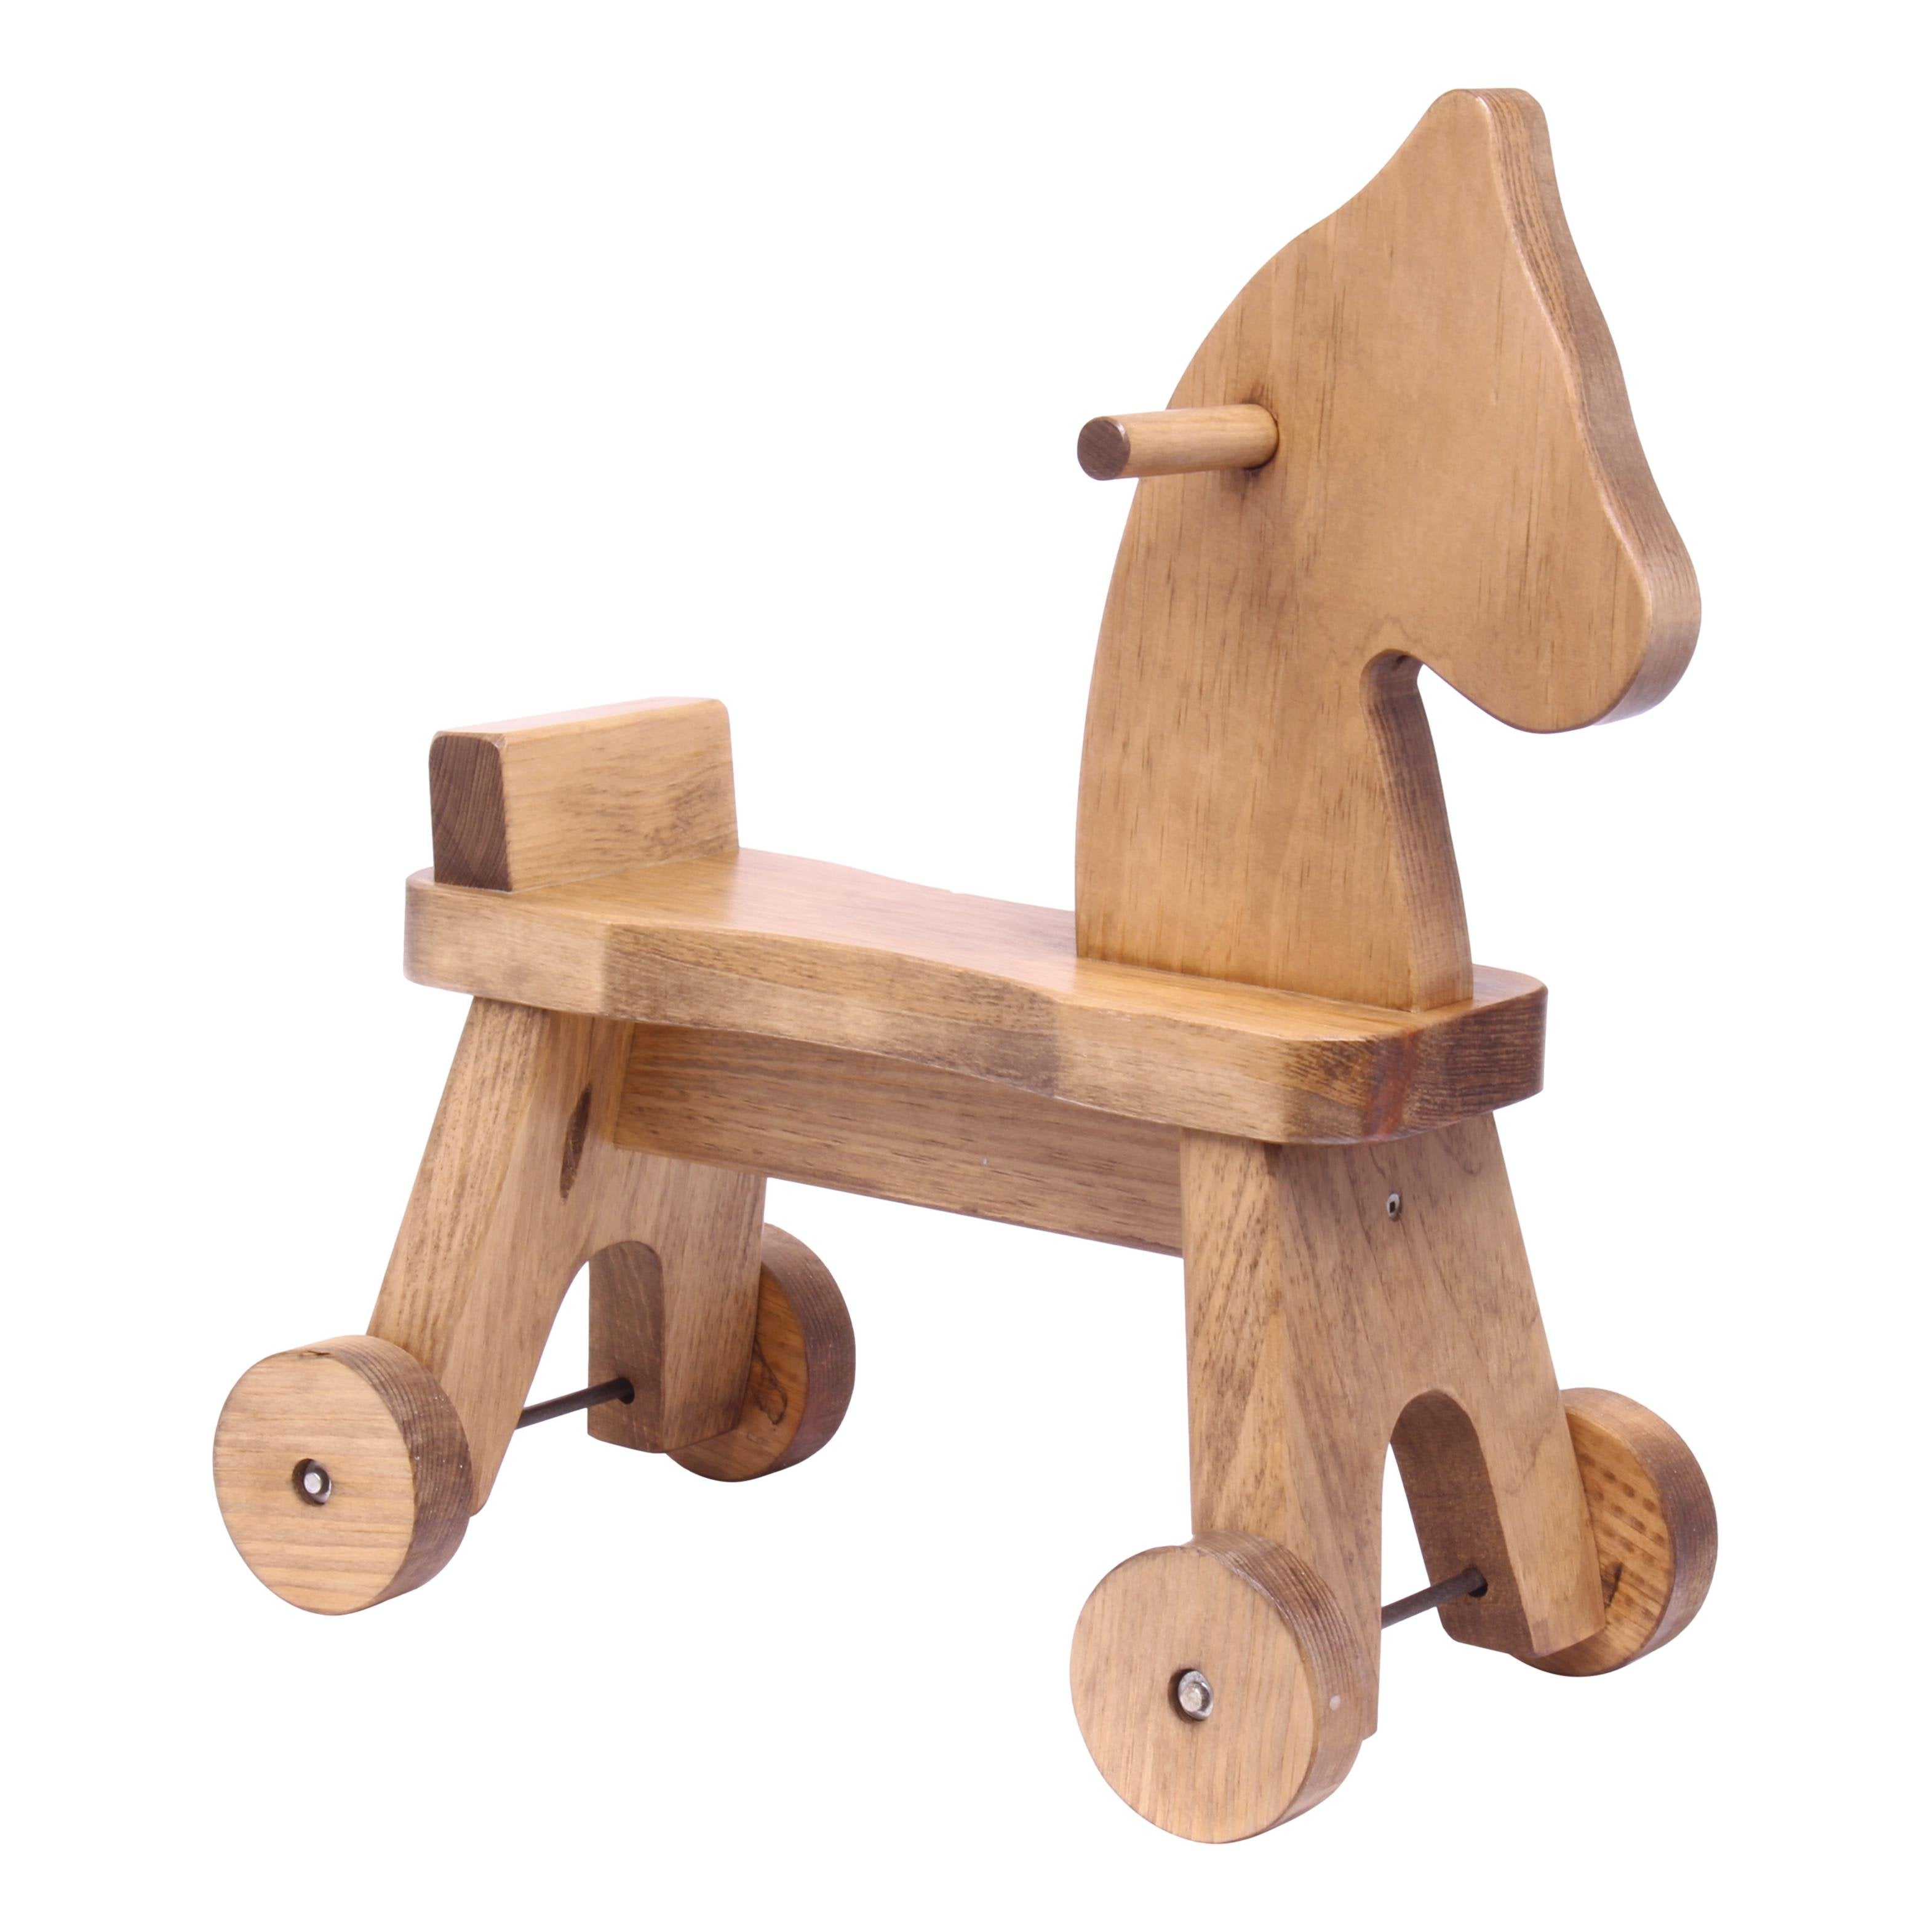 Amish-Made Wooden Riding Horse Toddler Ride Toy